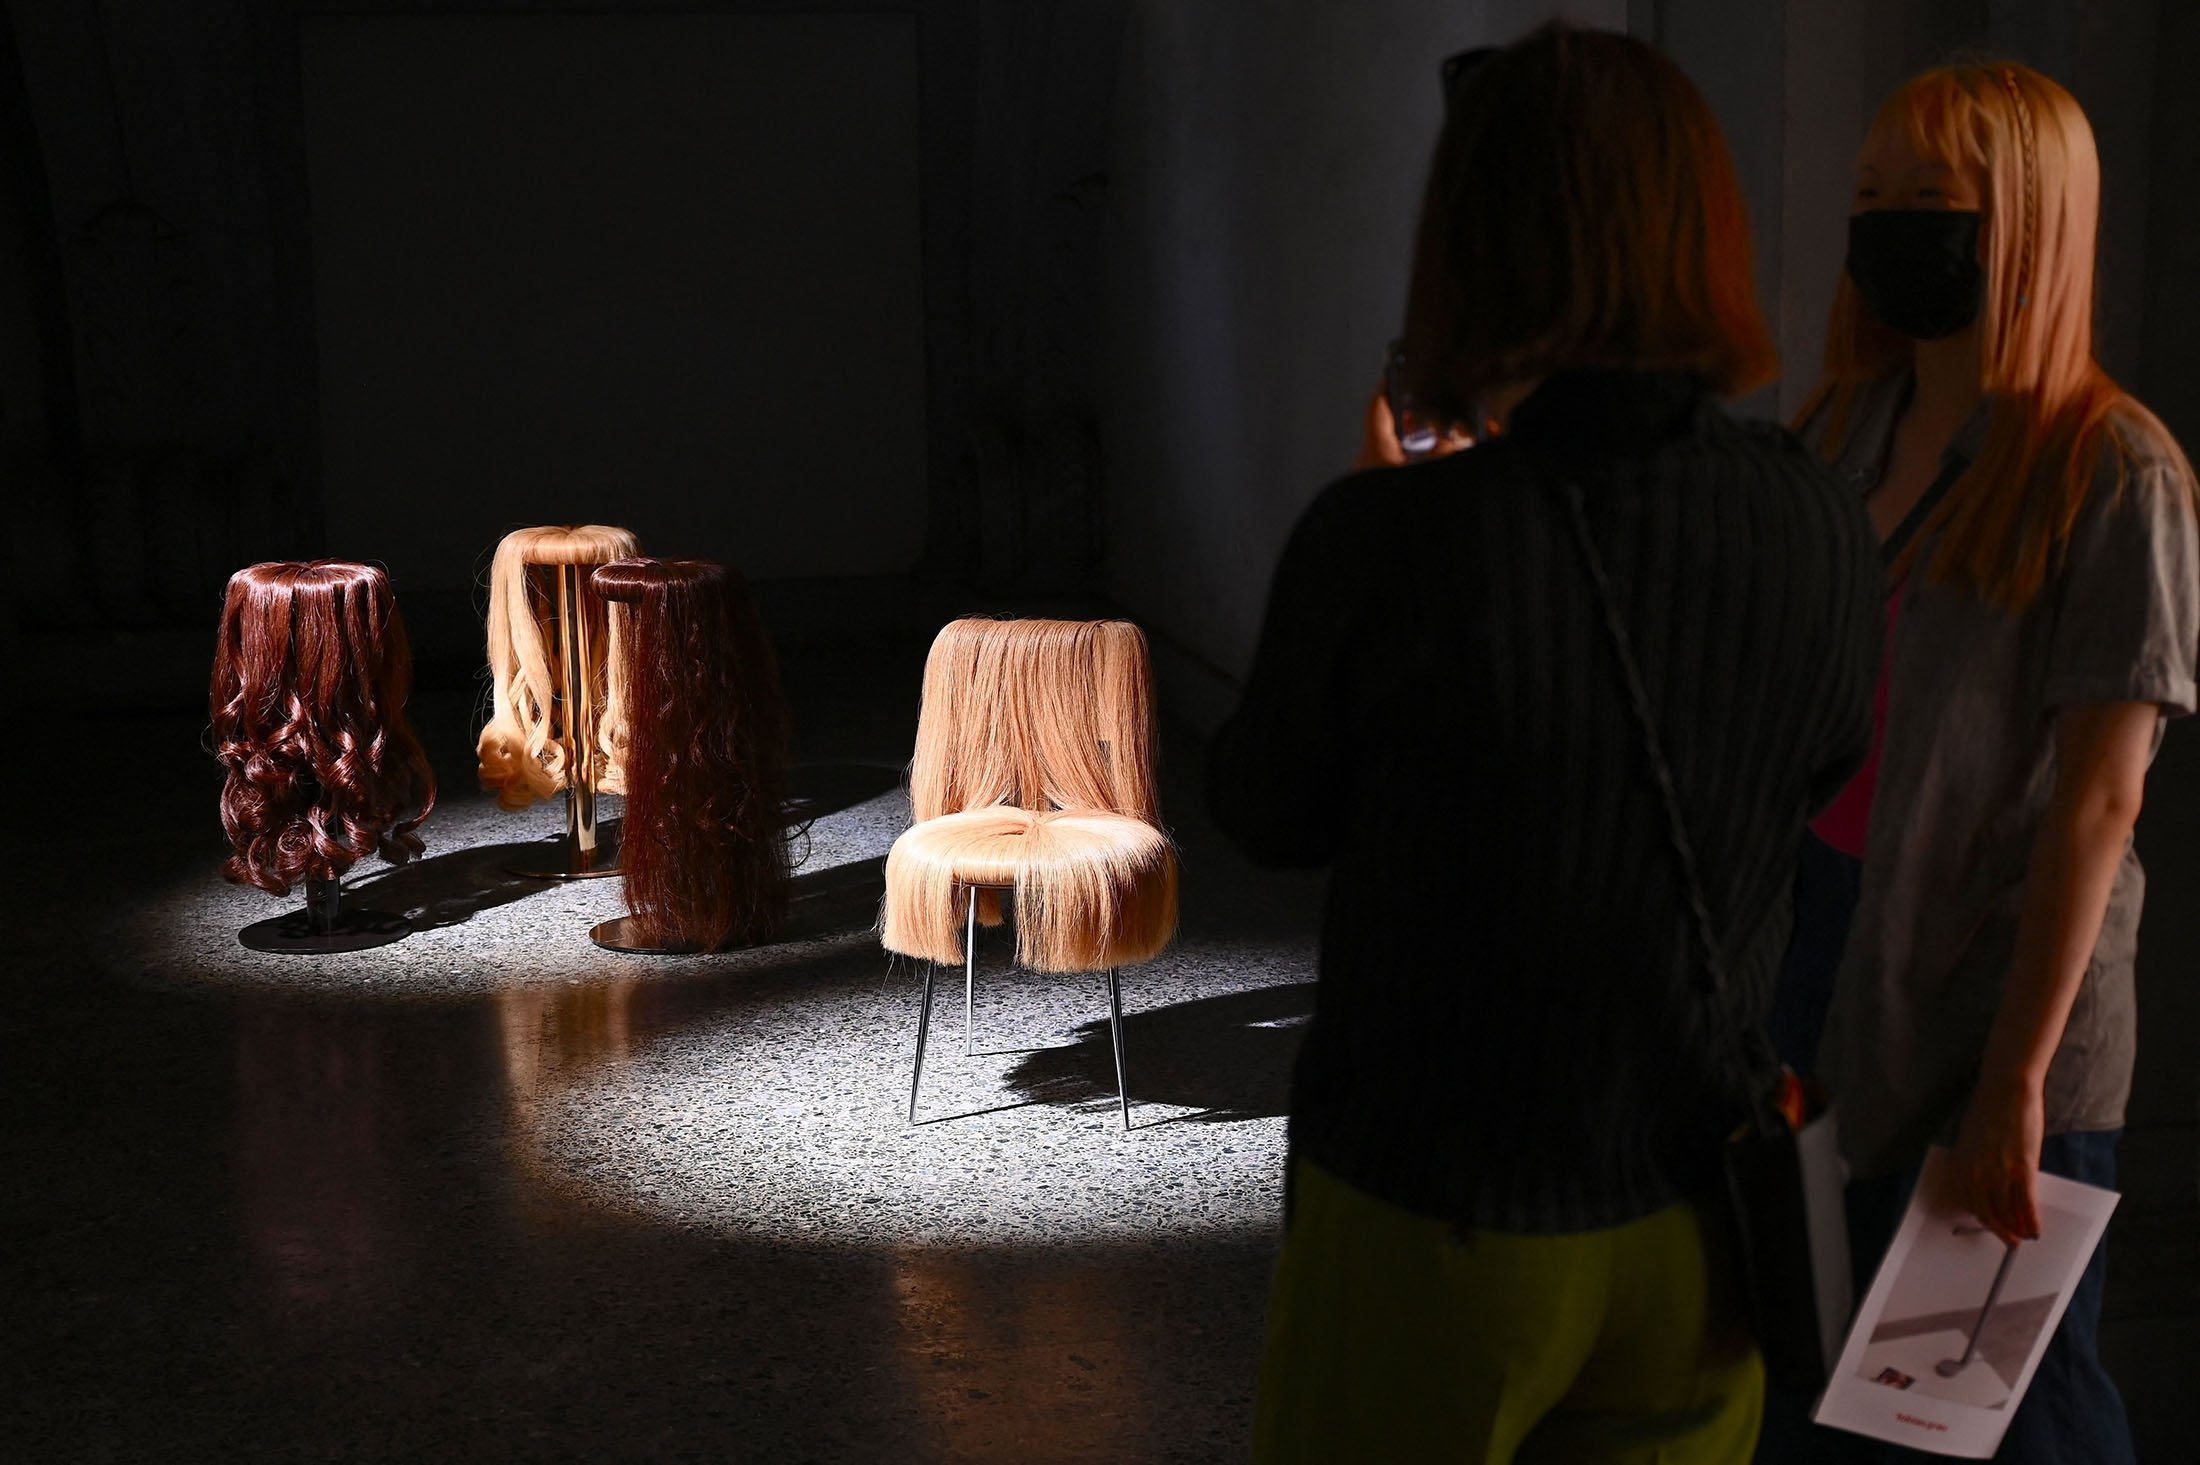 People look at Building Sugarcubes by artist Dejana Kabiljo displayed during the Fuorisalone 2021 design week in Palazzo Litta, in Milan, Italy, Sept. 4, 2021. (AFP Photo)